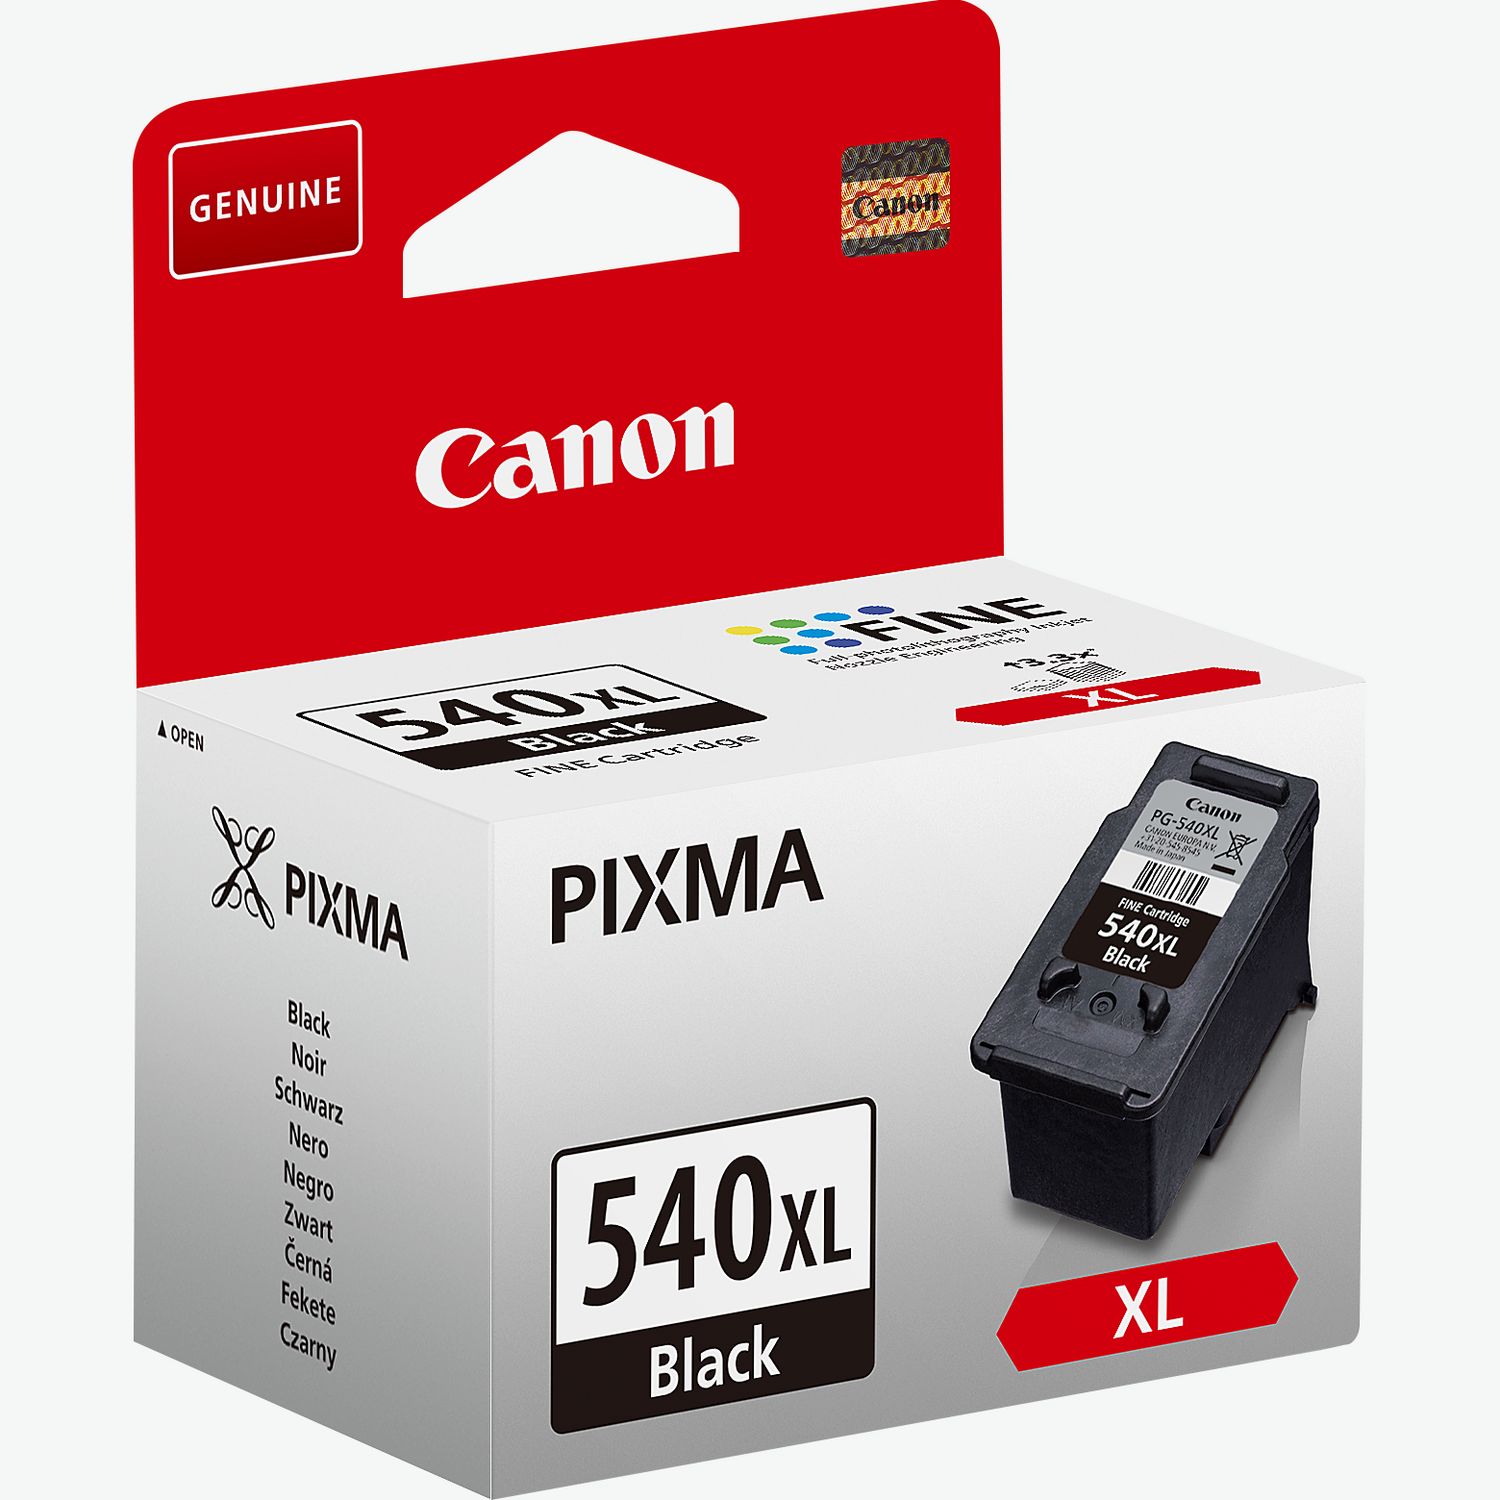 Canon PG-540 / CL-541 Multipack